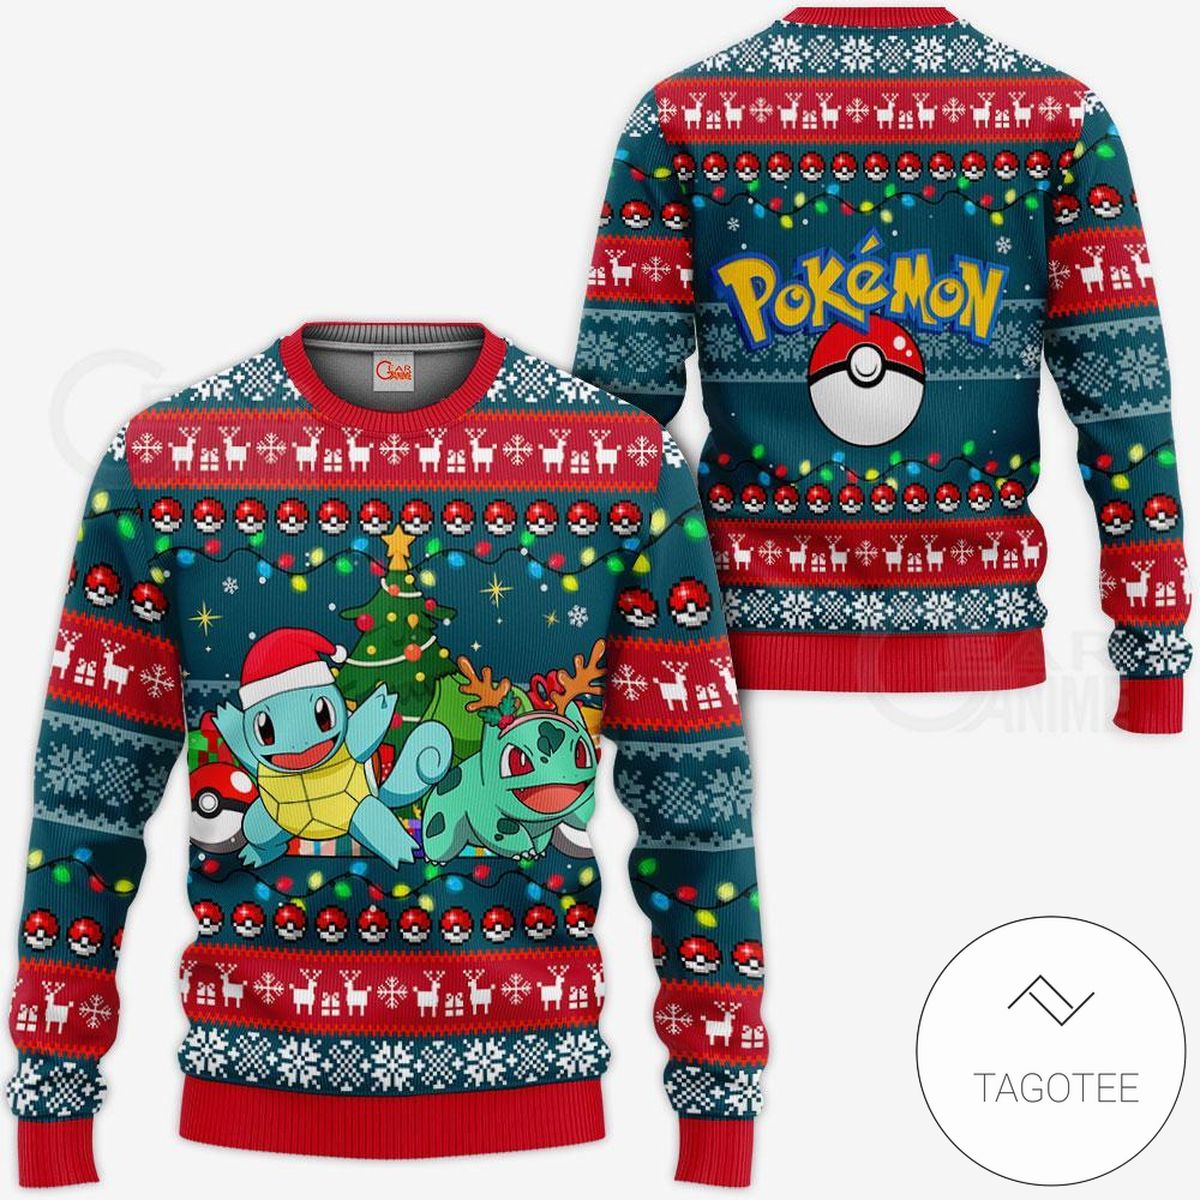 Bulbasaur and Squirtle Knitted Ugly Christmas Sweater Pokemon Xmas